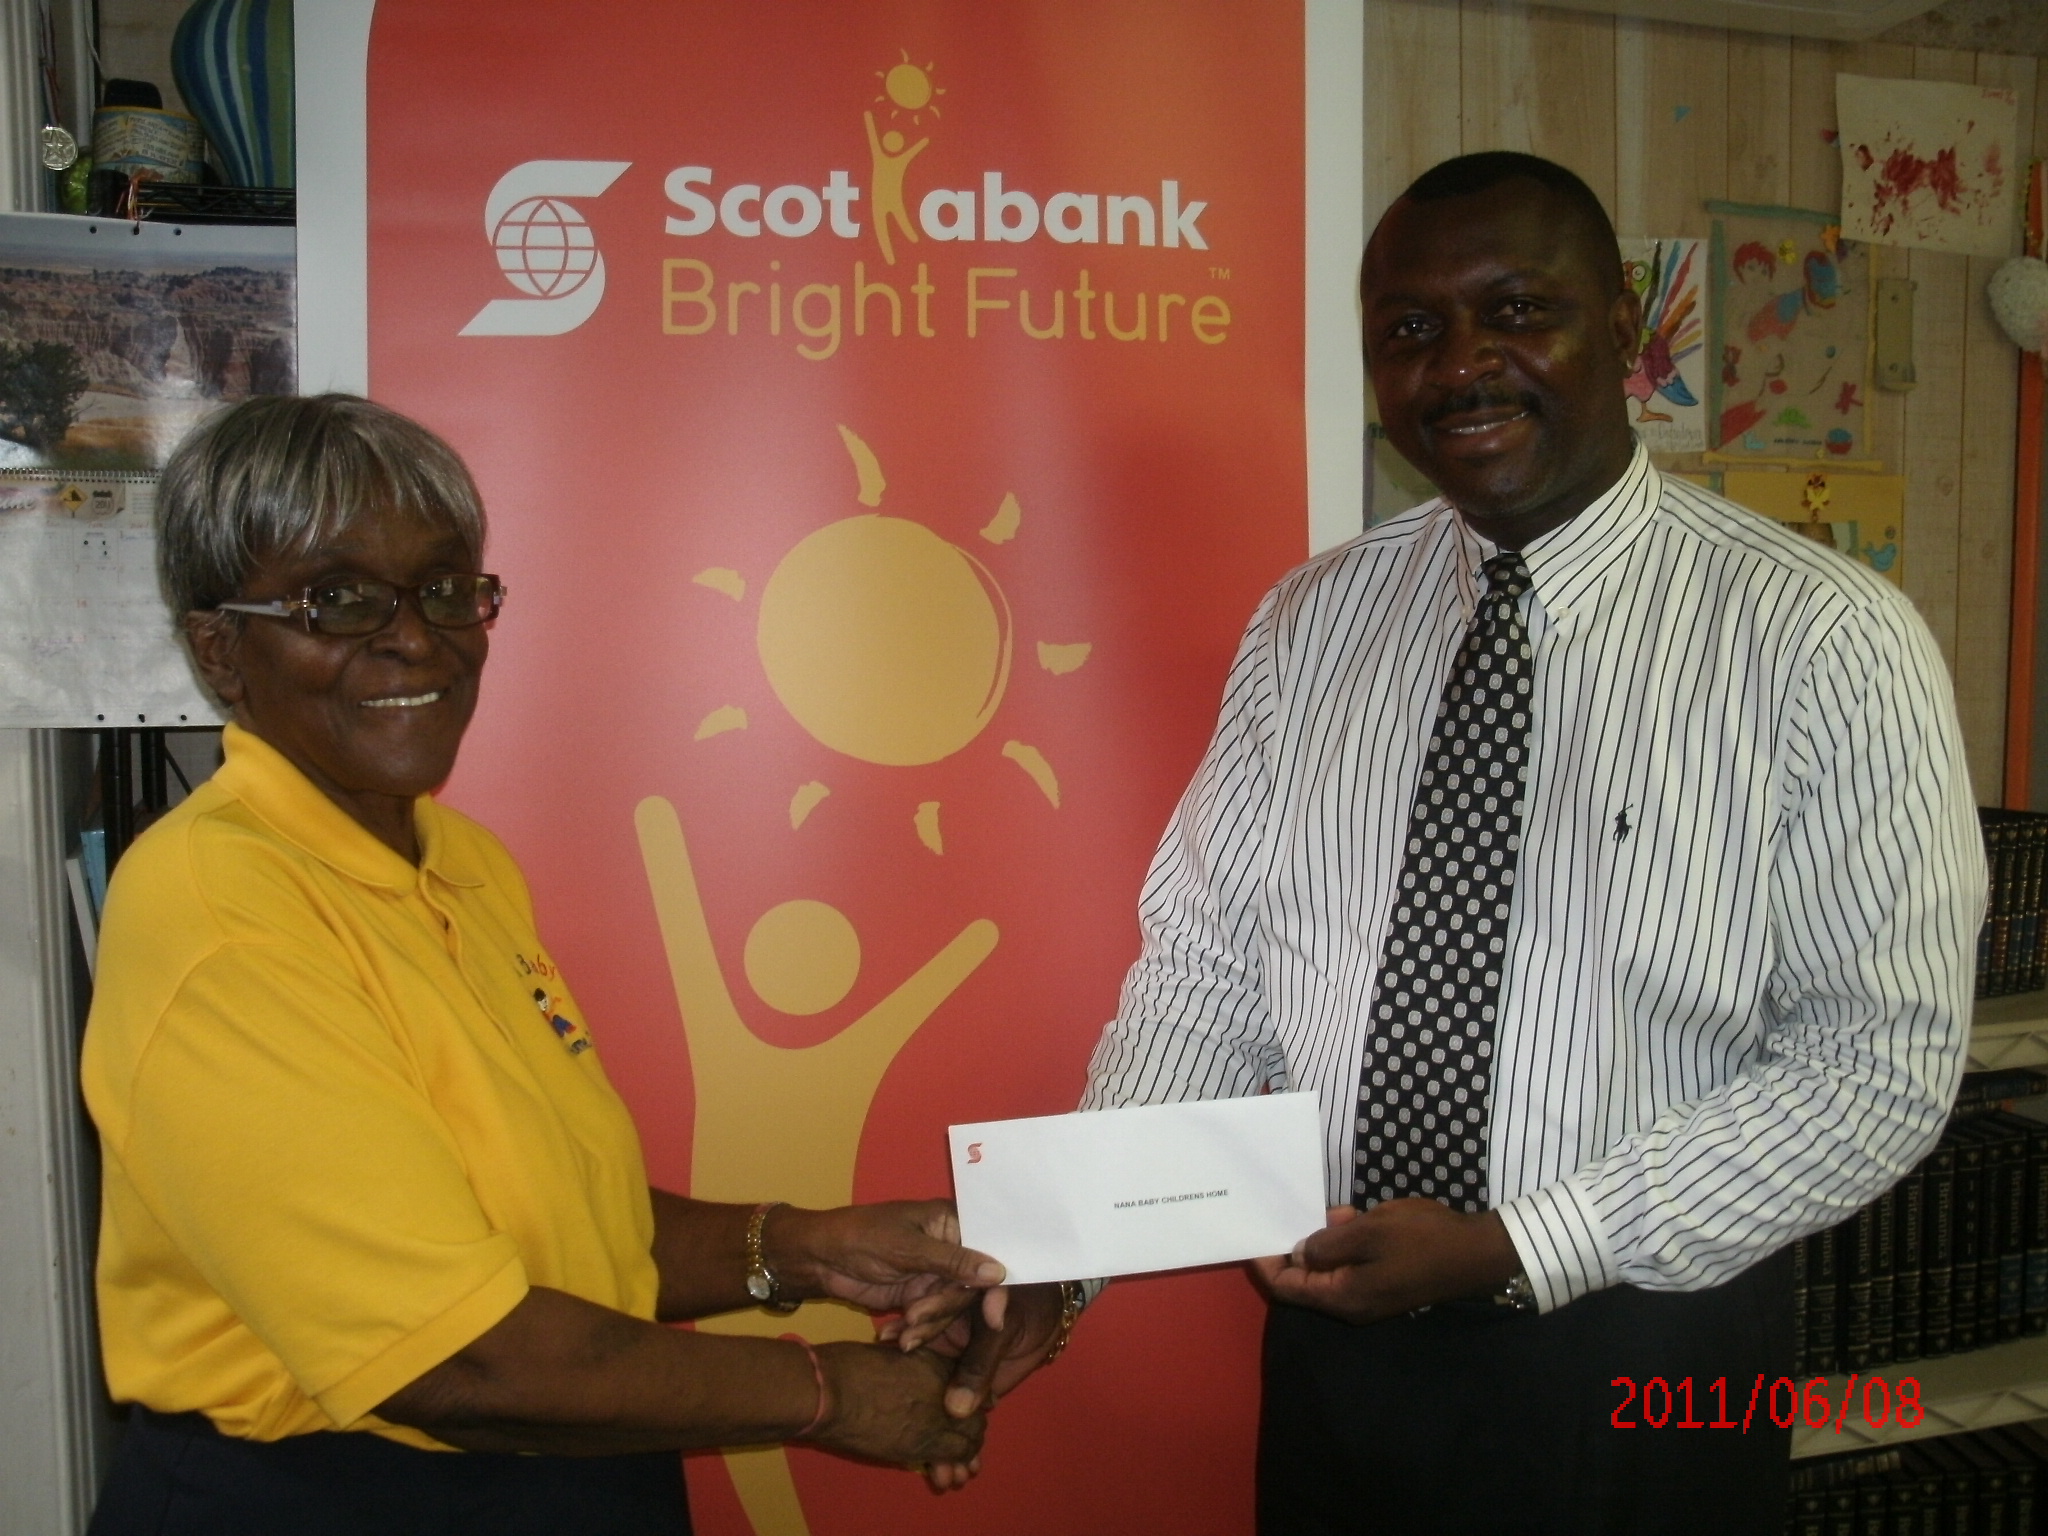 Beulah Wilson, Director of Nana Baby Children’s Home on St. Thomas, accepts a donation from  Scotiabank Branch Manager, Steve Gardner as part of the Scotiabank Bright Future program.